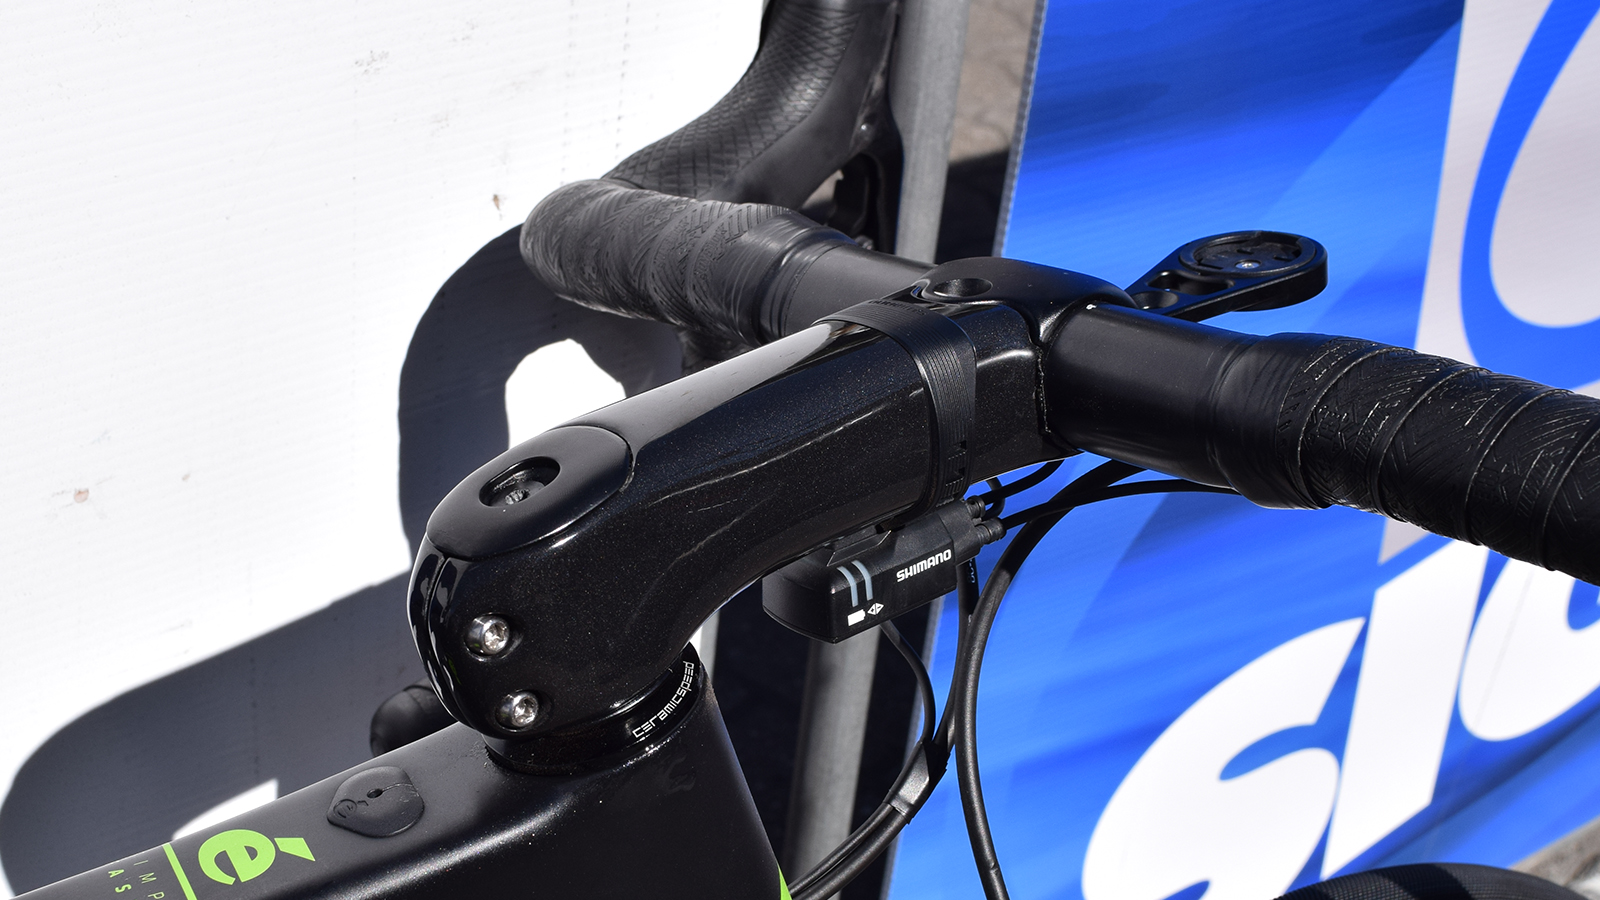 New aero road stem from ENVE spotted at Tour Down Under - Gallery